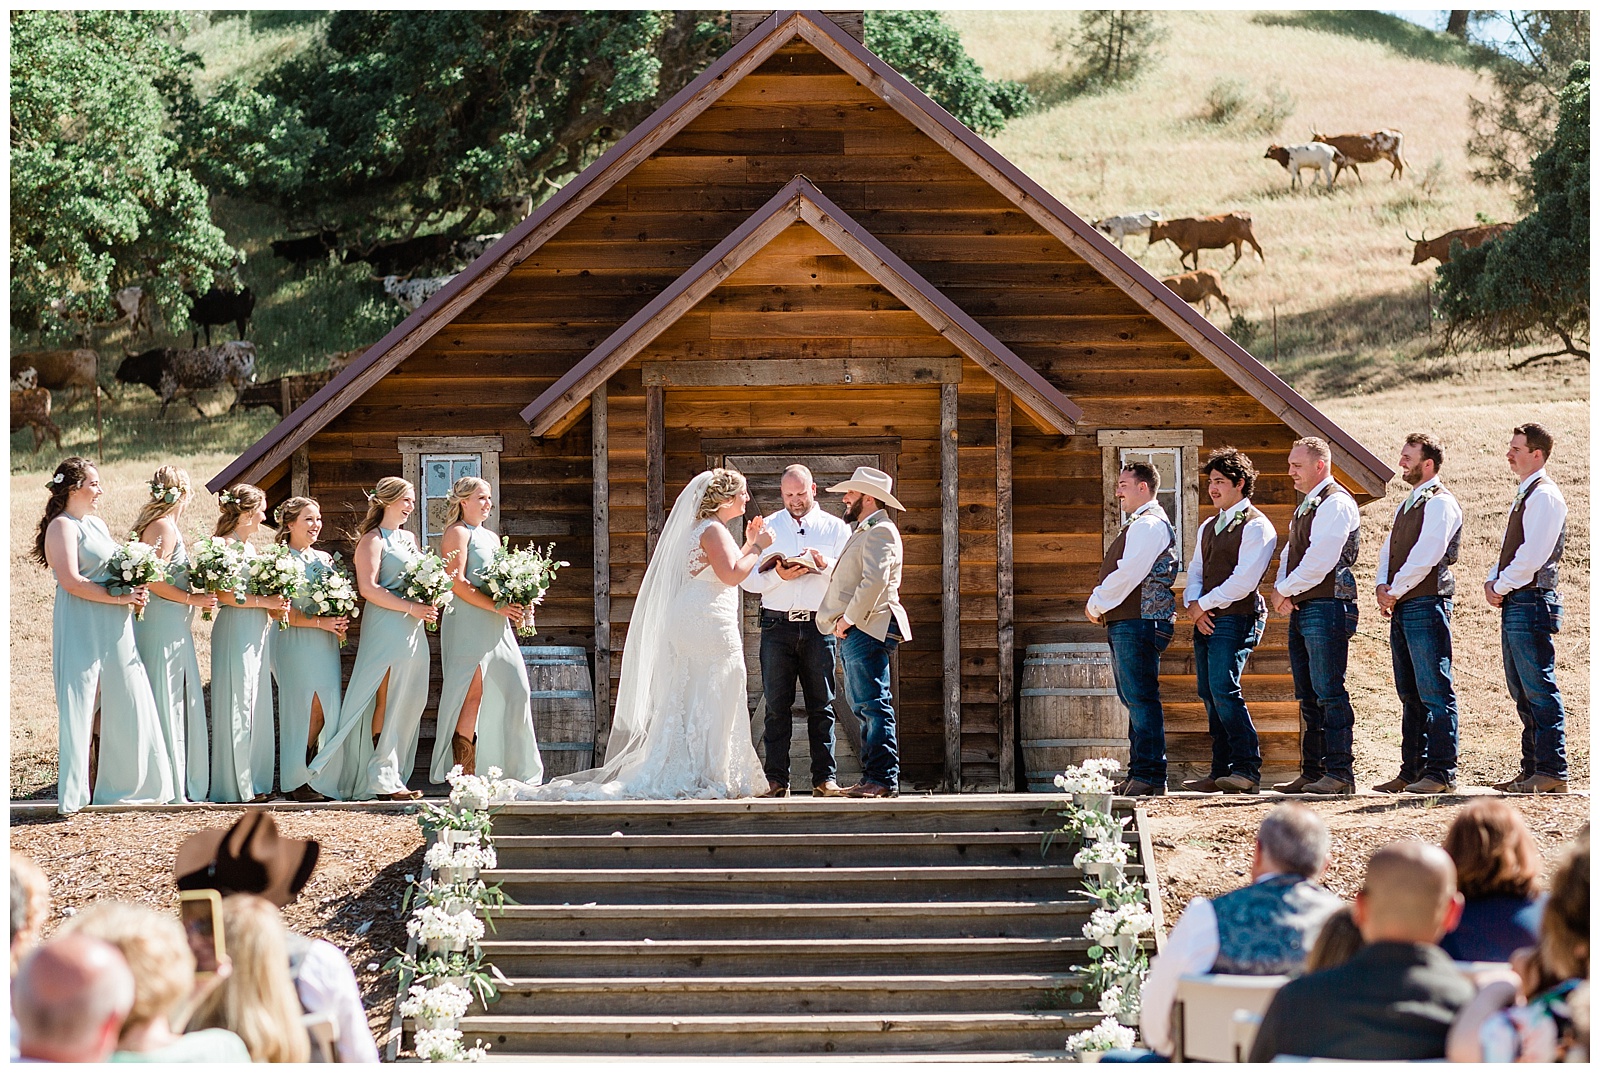 cattle drive during the wedding ceremony at fox creek ranch